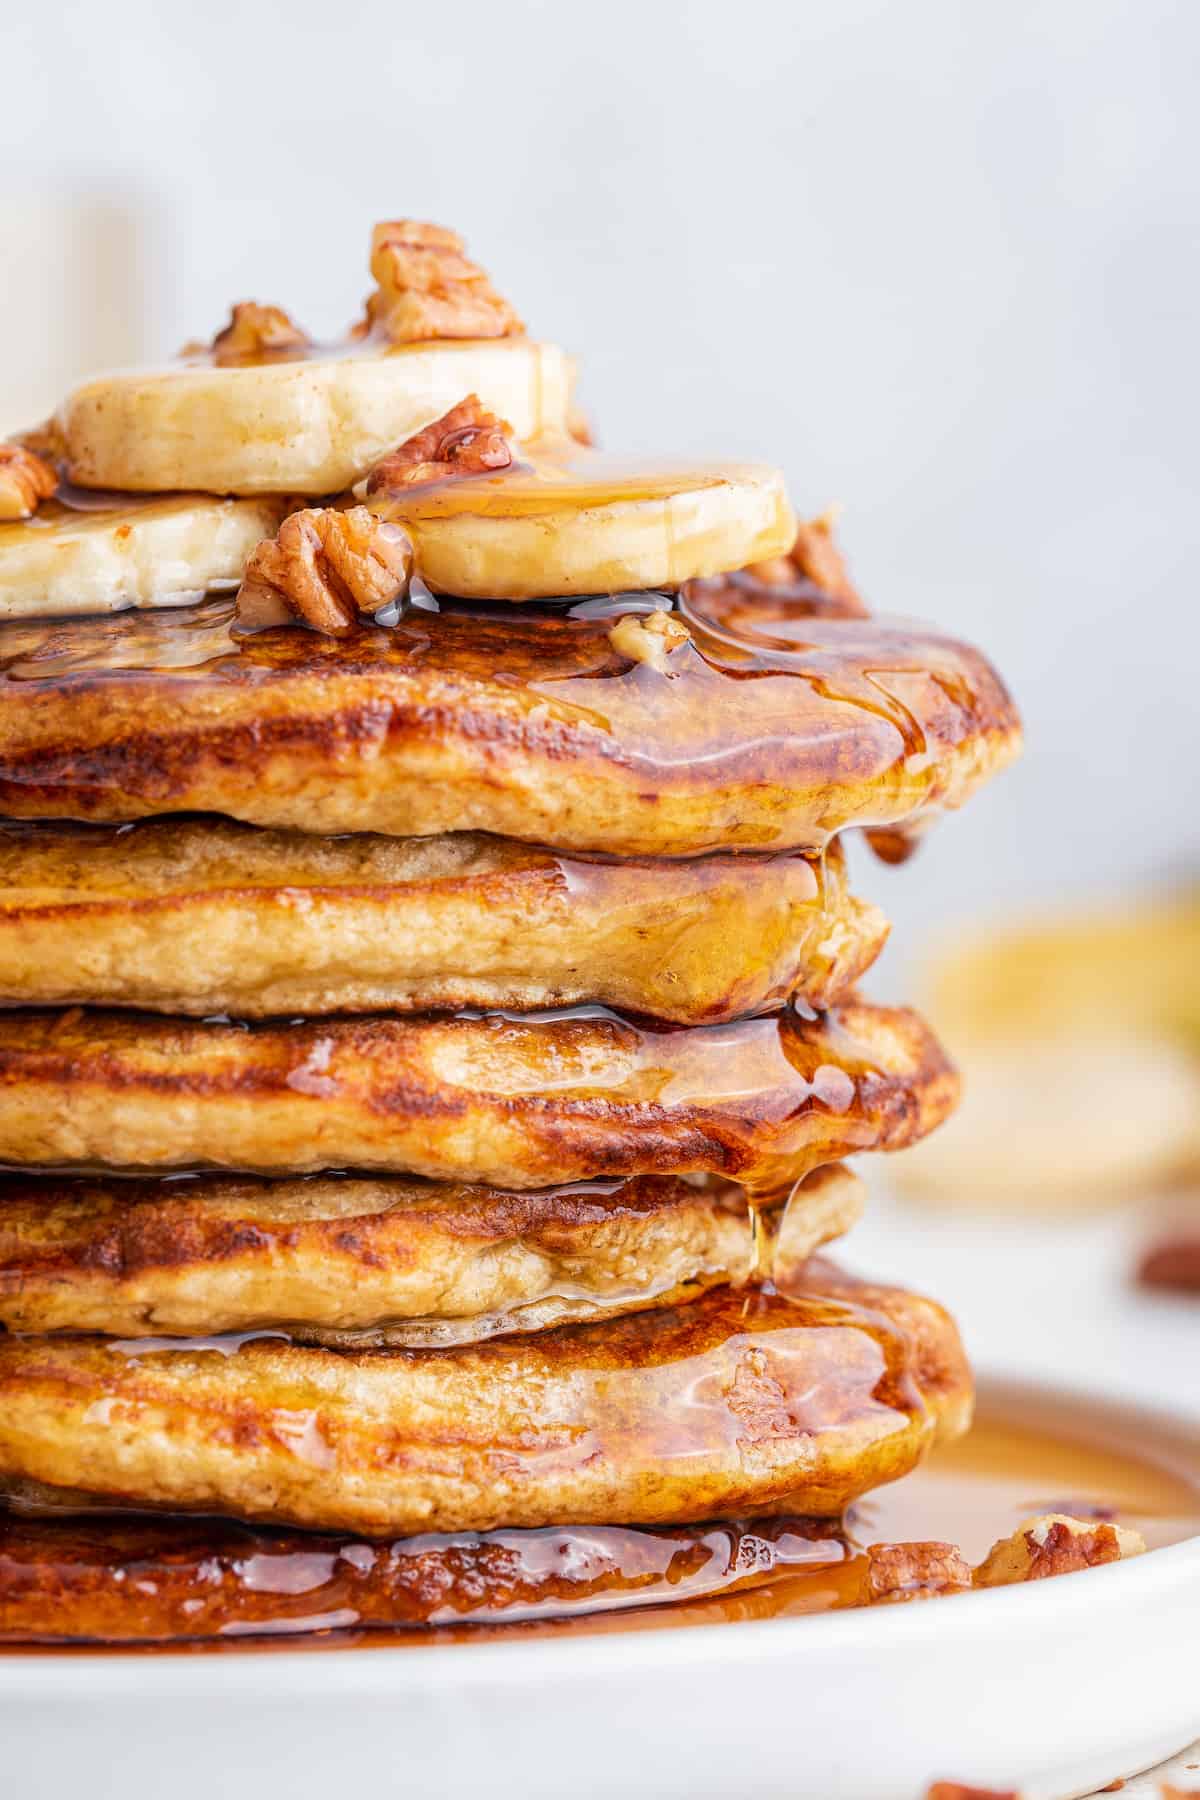 Side view of oatmeal banana pancakes stacked on plate to show thick, fluffy texture